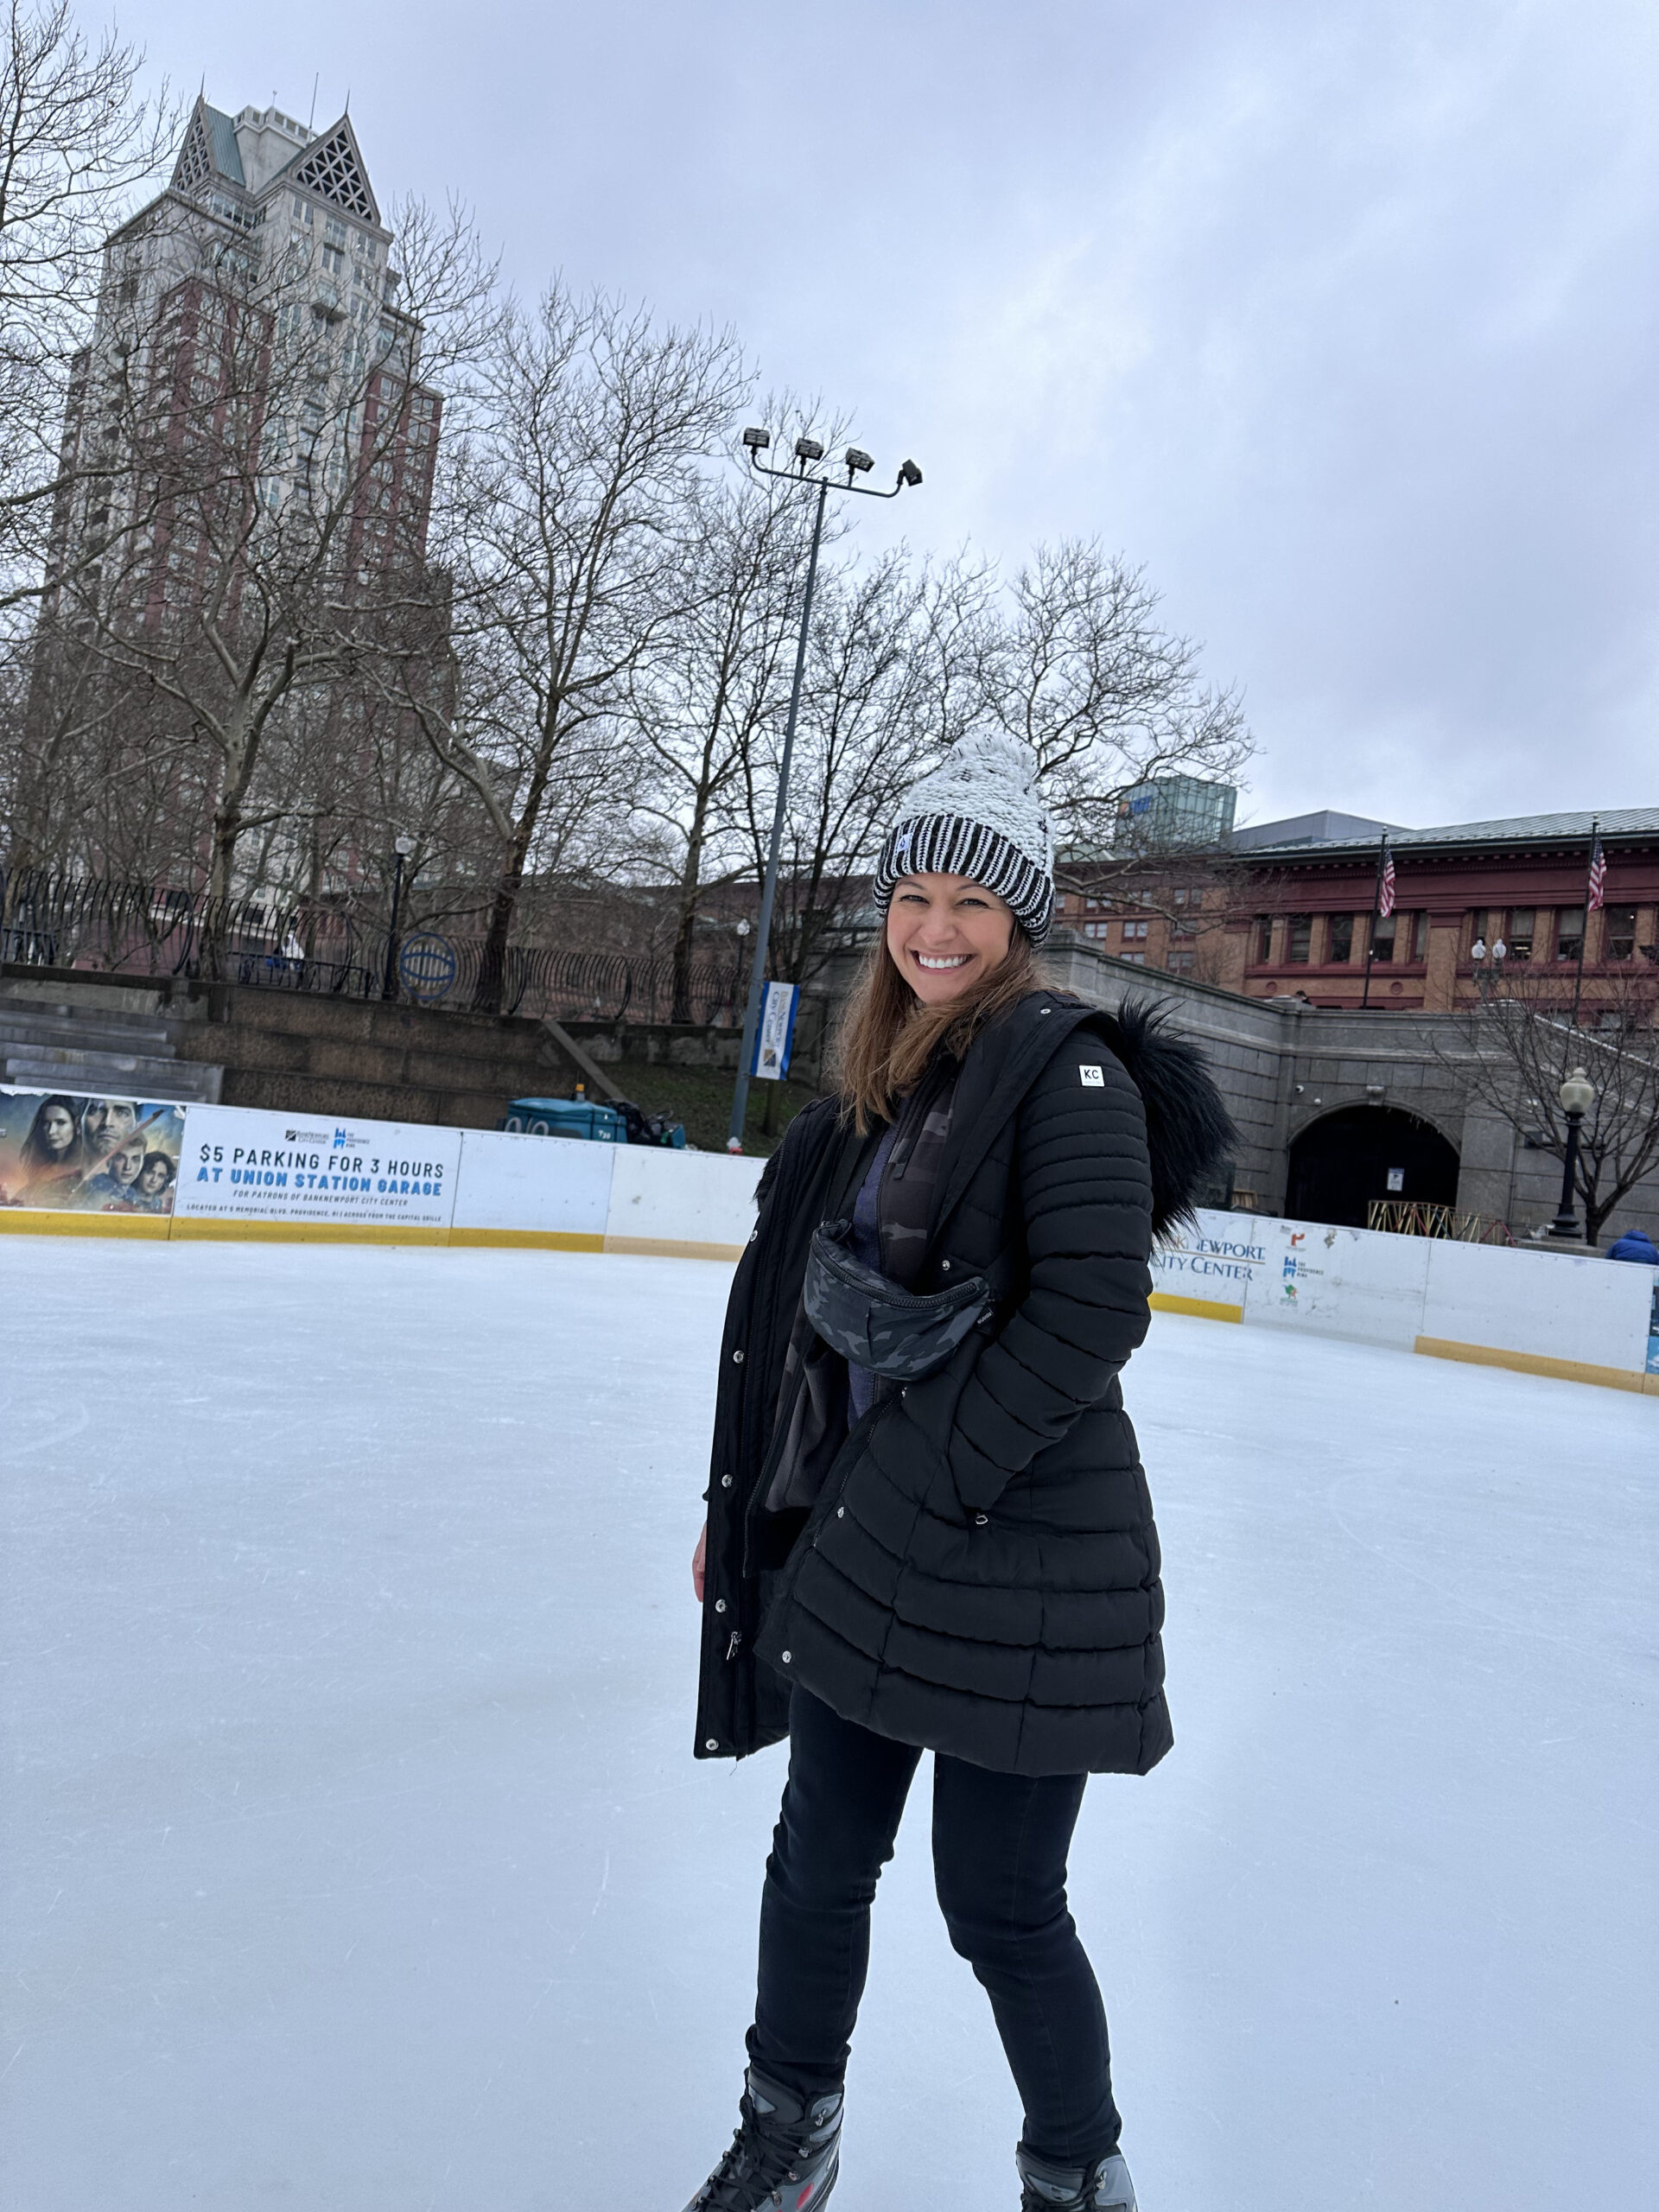 Bank Newport City Center ice rink Providence, Rhode Island with kids